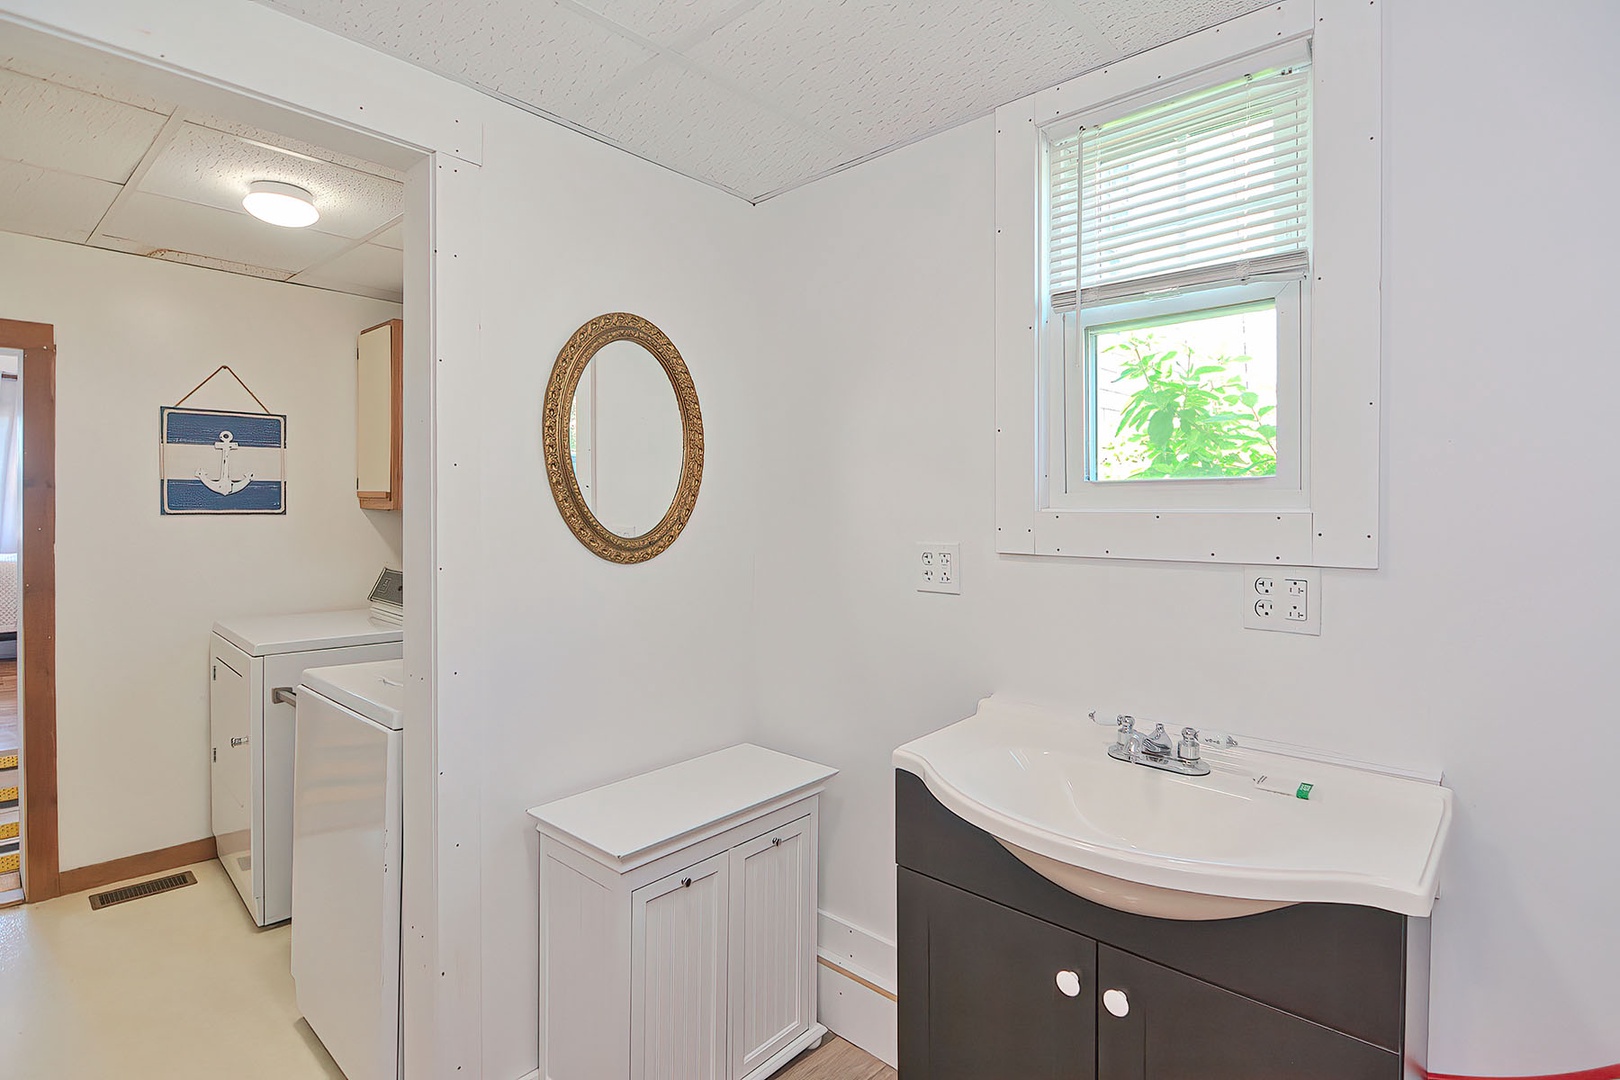 Bathroom 1: There is a bathroom beyond the laundry area, with a walk-in shower..